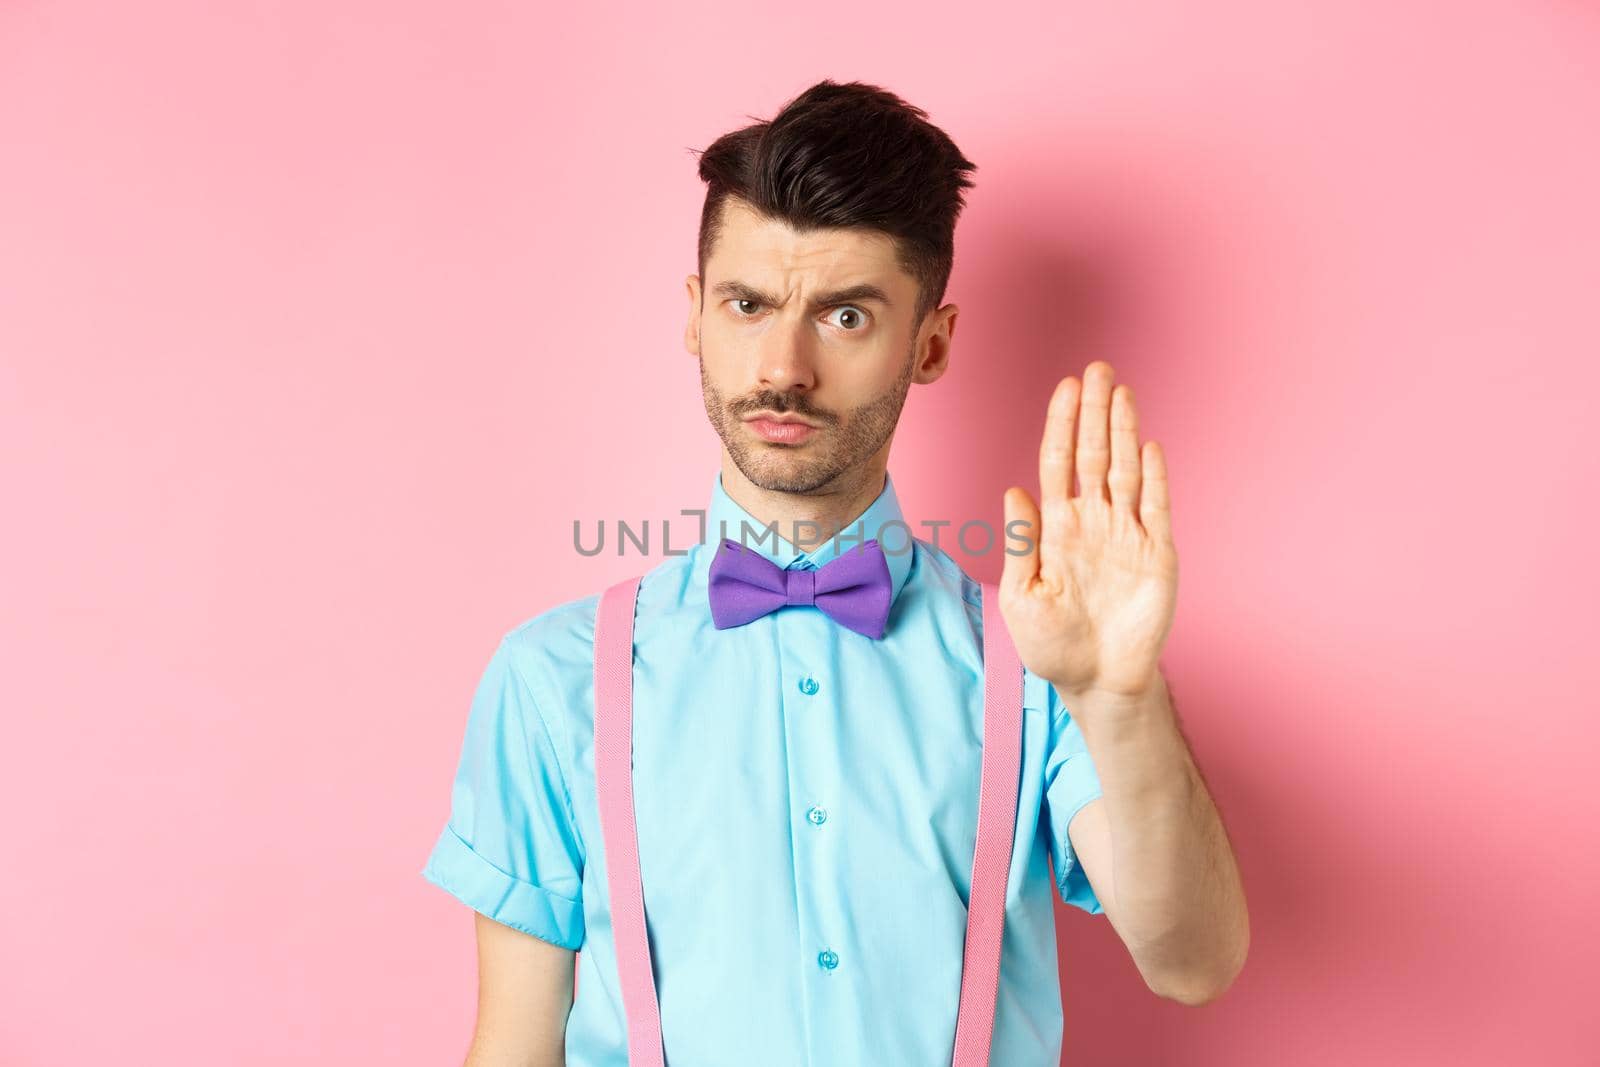 Serious-looking man prohibit something bad, stretch out hand to stop you, forbid action, saying no and looking strict, standing over pink background.